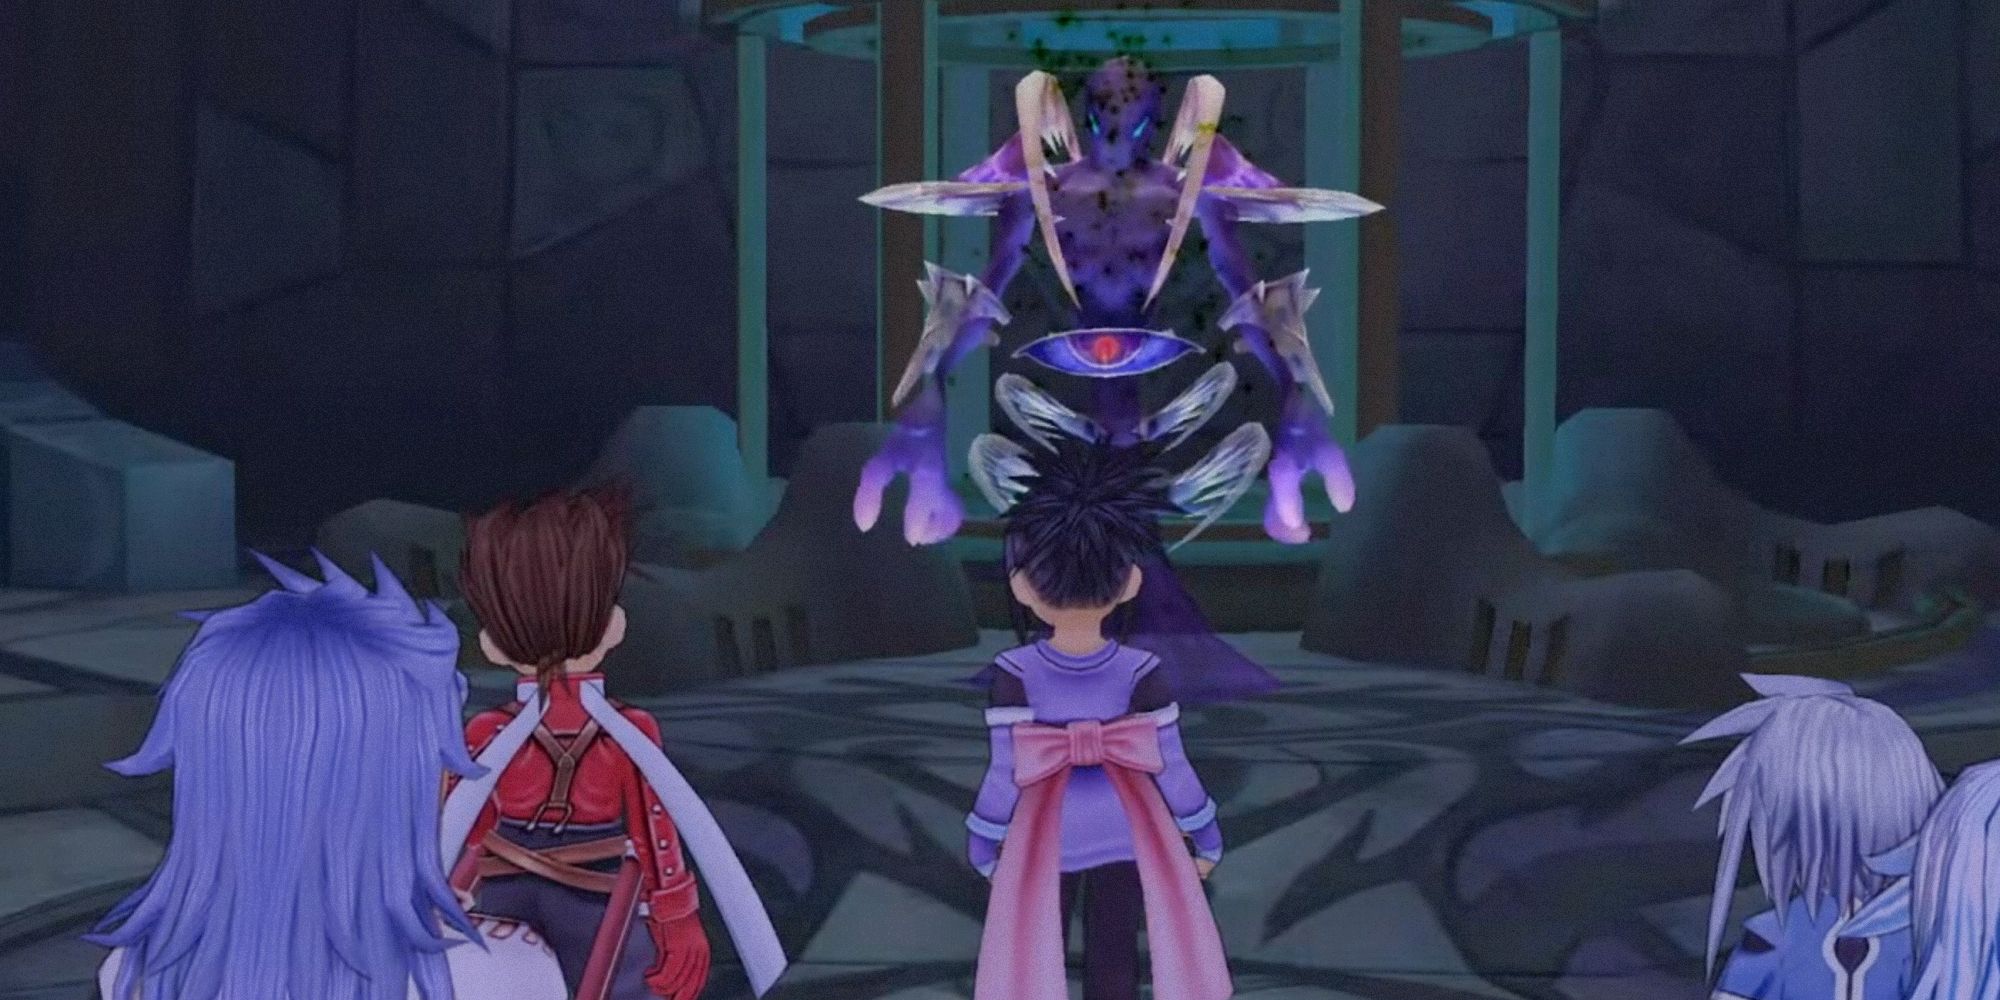 Tales of Symphonia Lloyd and the team staring down a purple being.